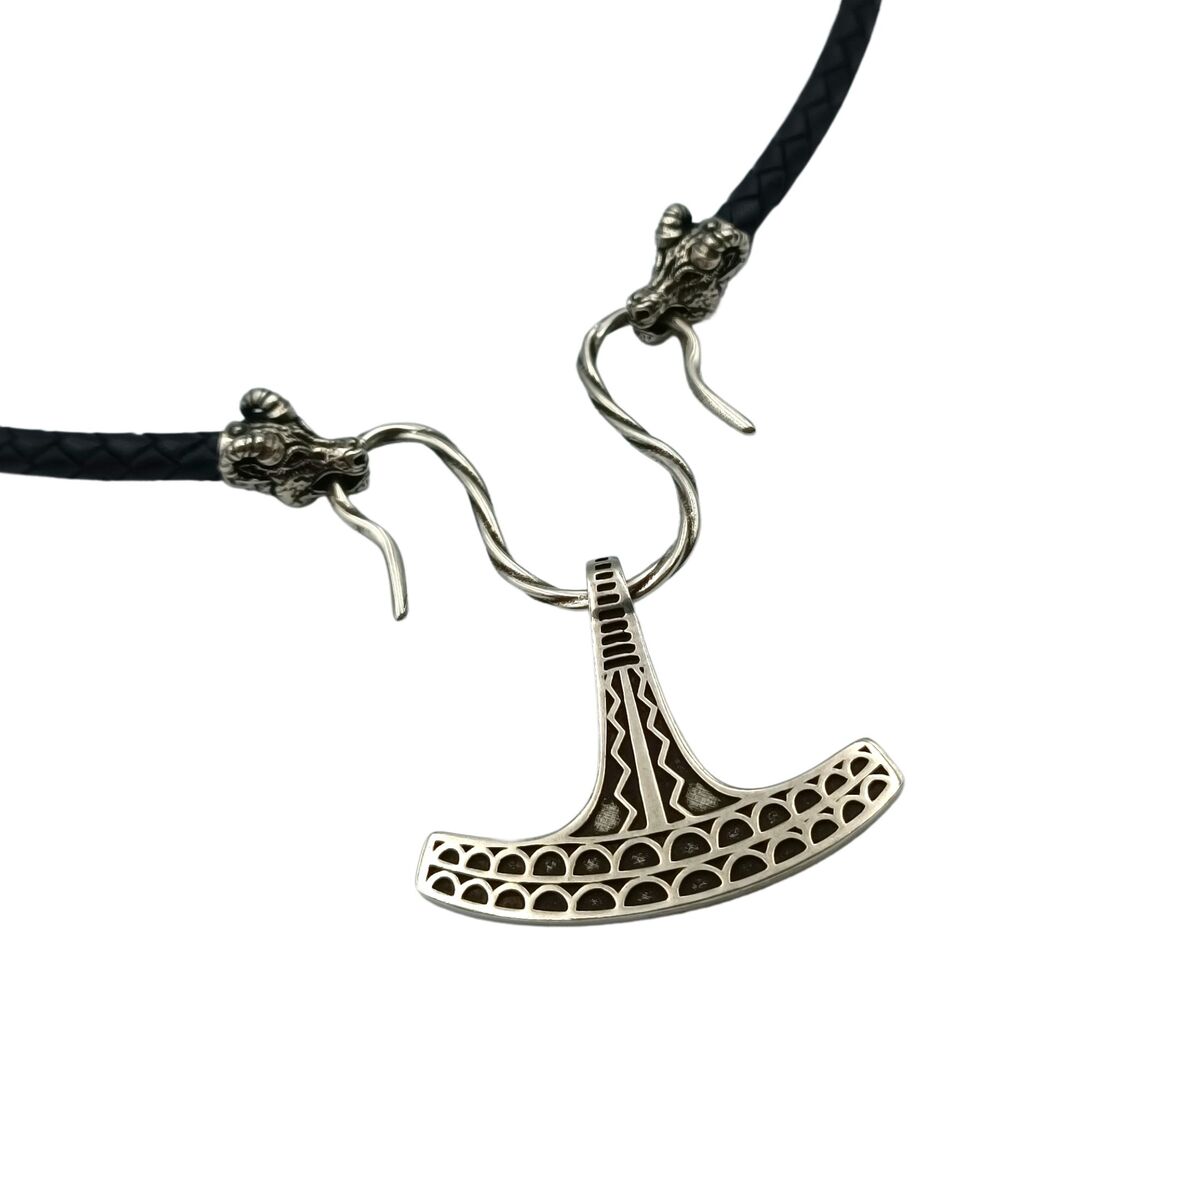 Ukko's Hammer pendant from silver Goat necklace  